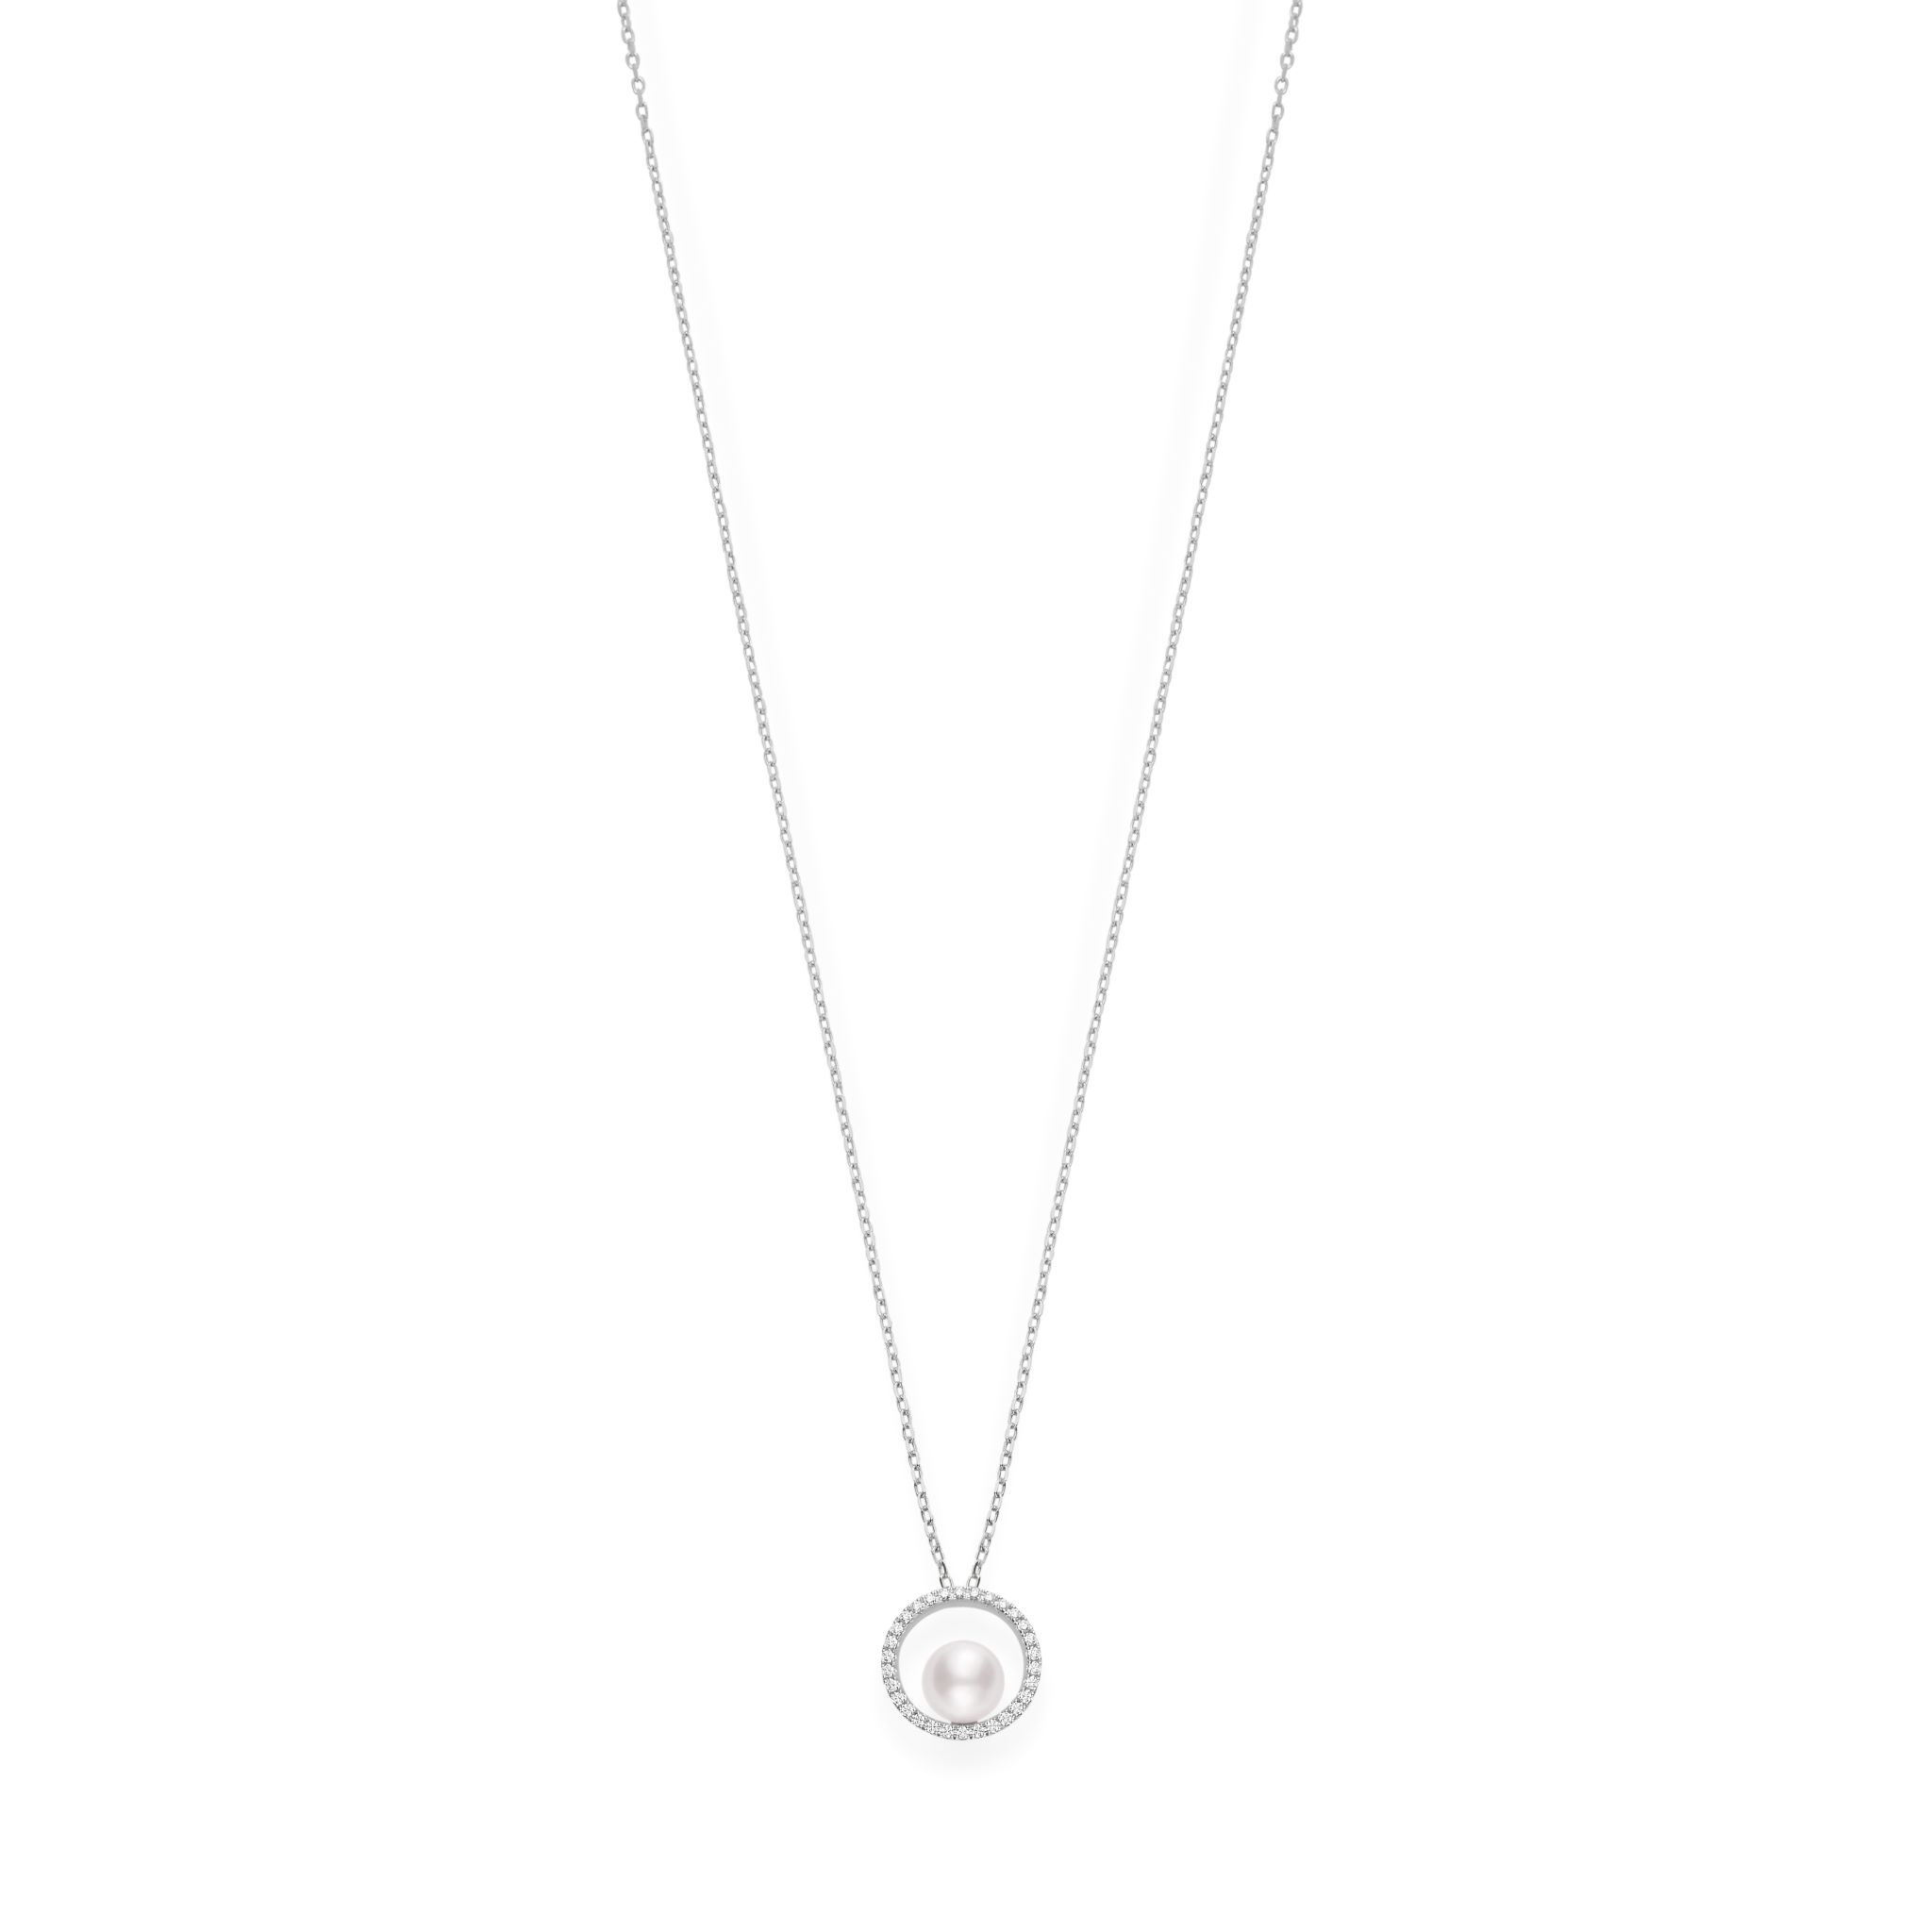 491601Diamond and Pearl Cradle Necklace